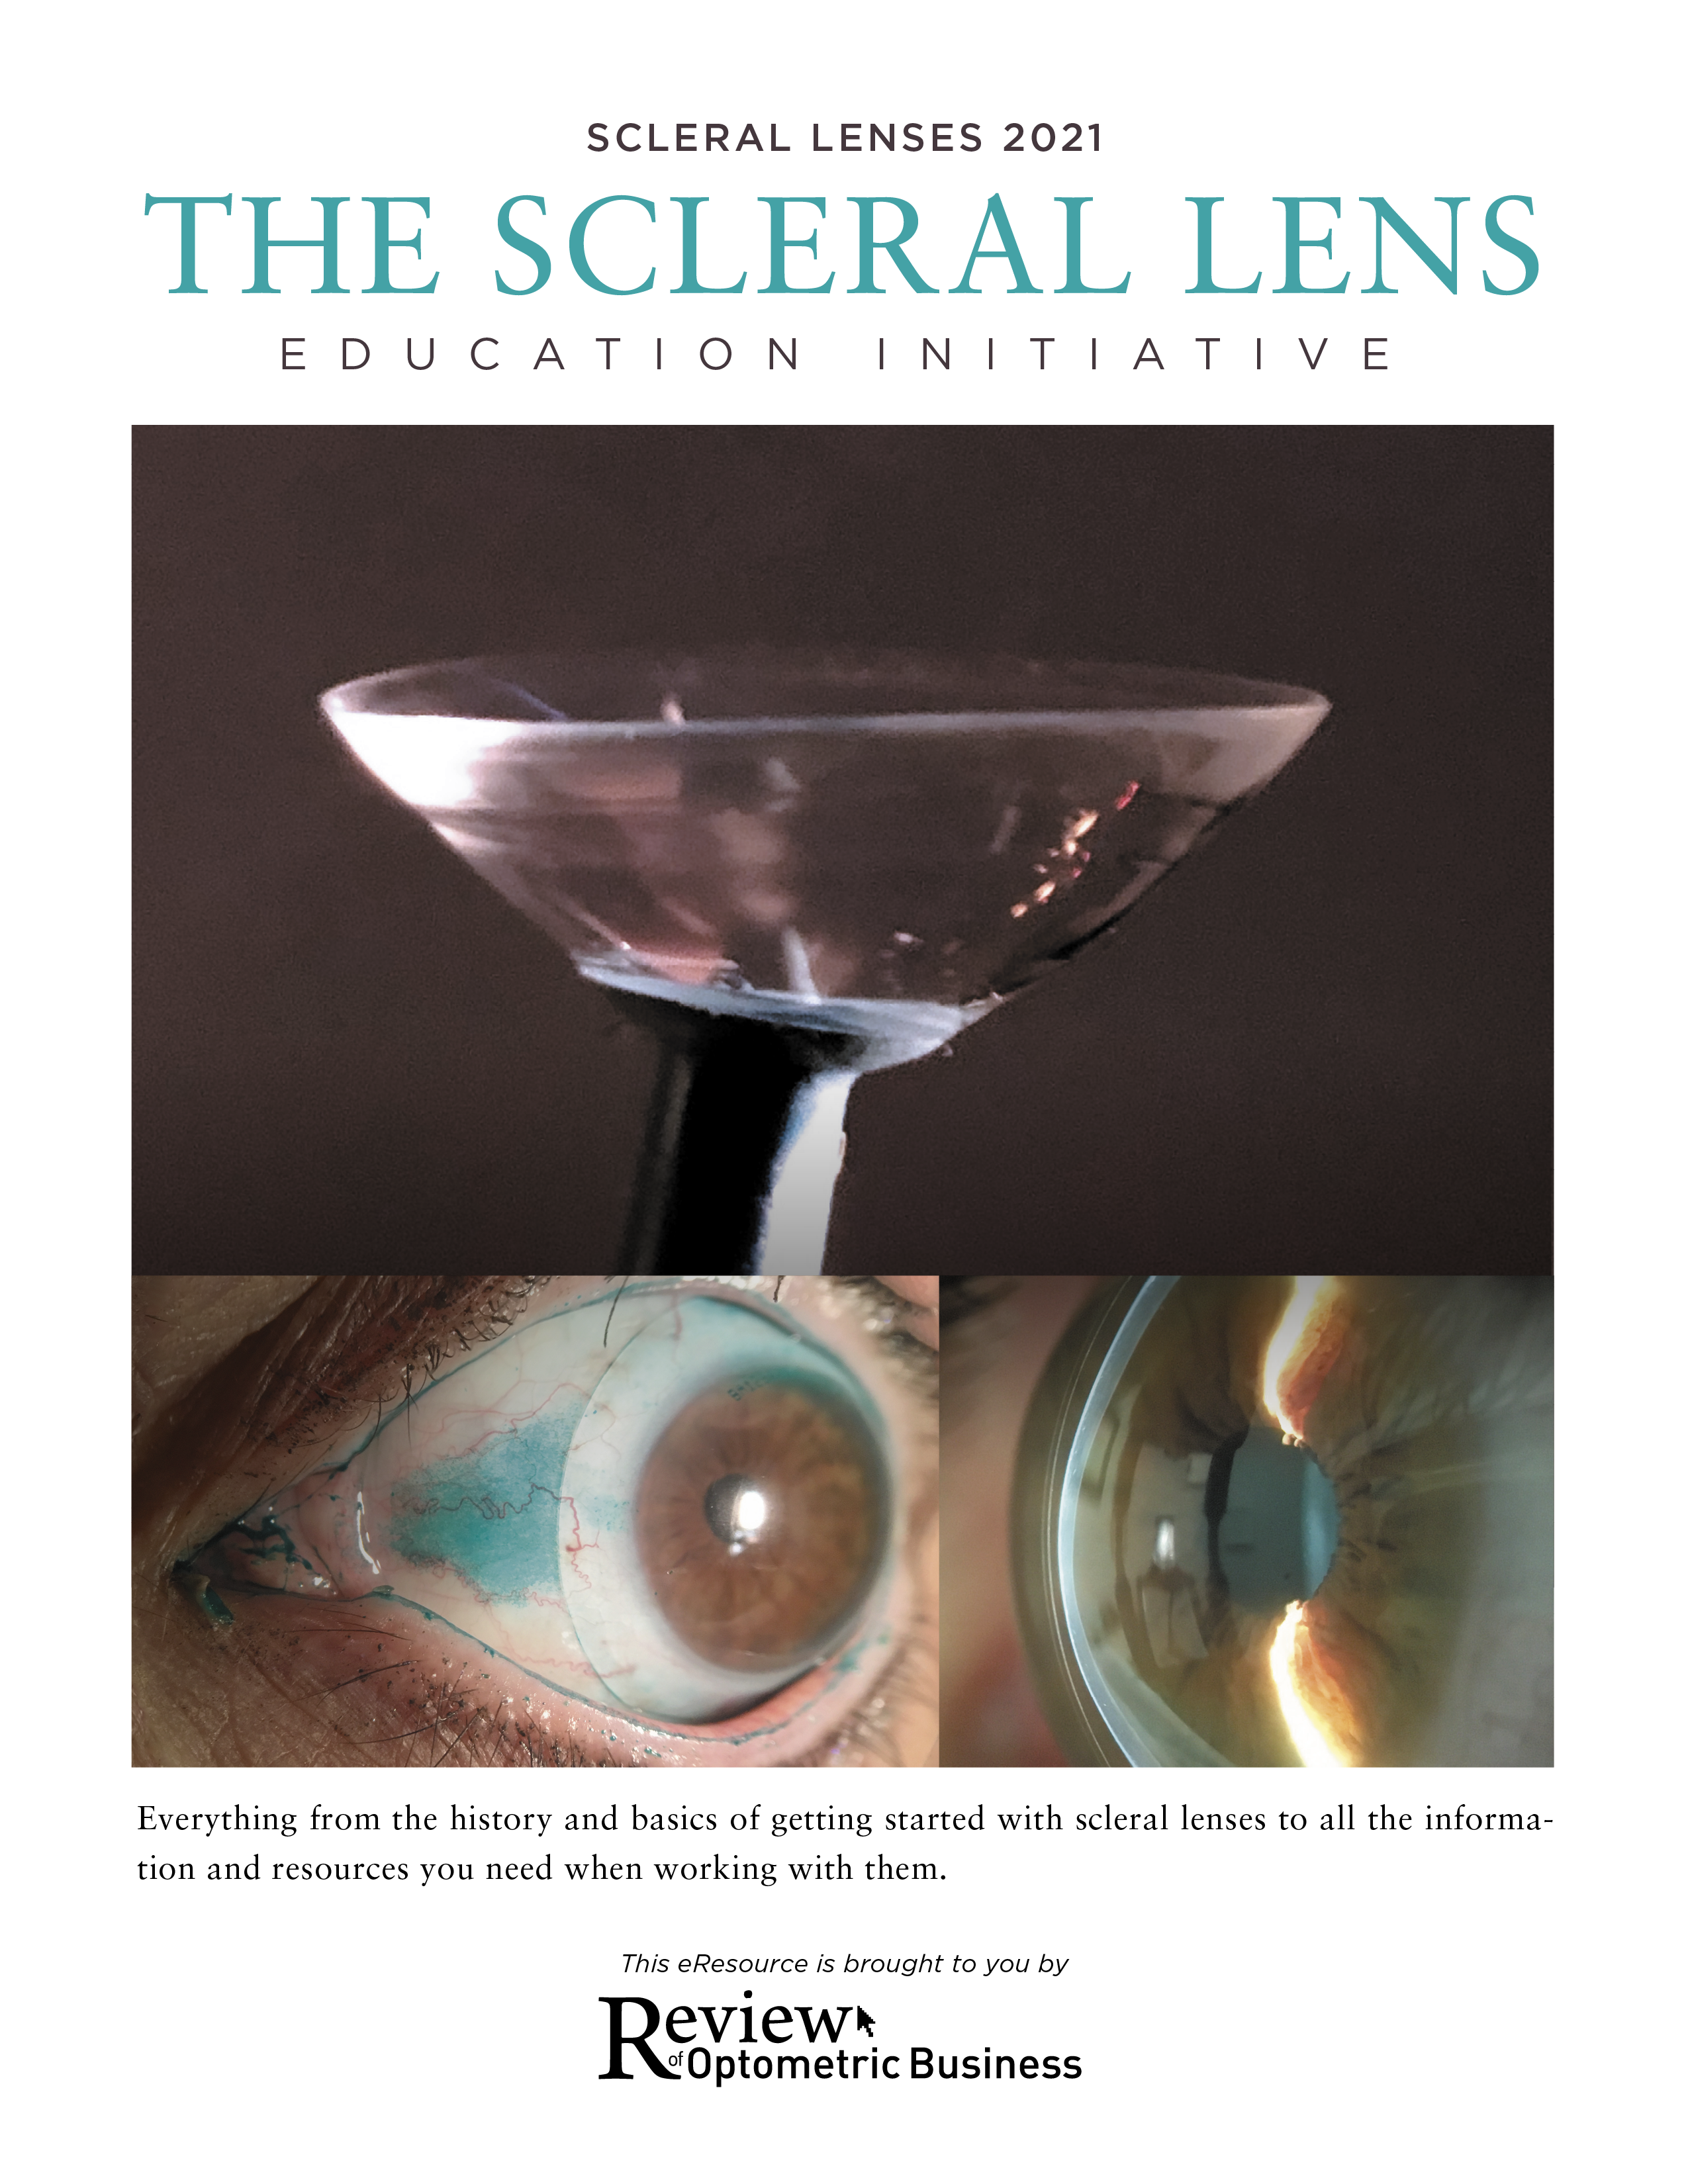 2021 Scleral Lens Education Initiative